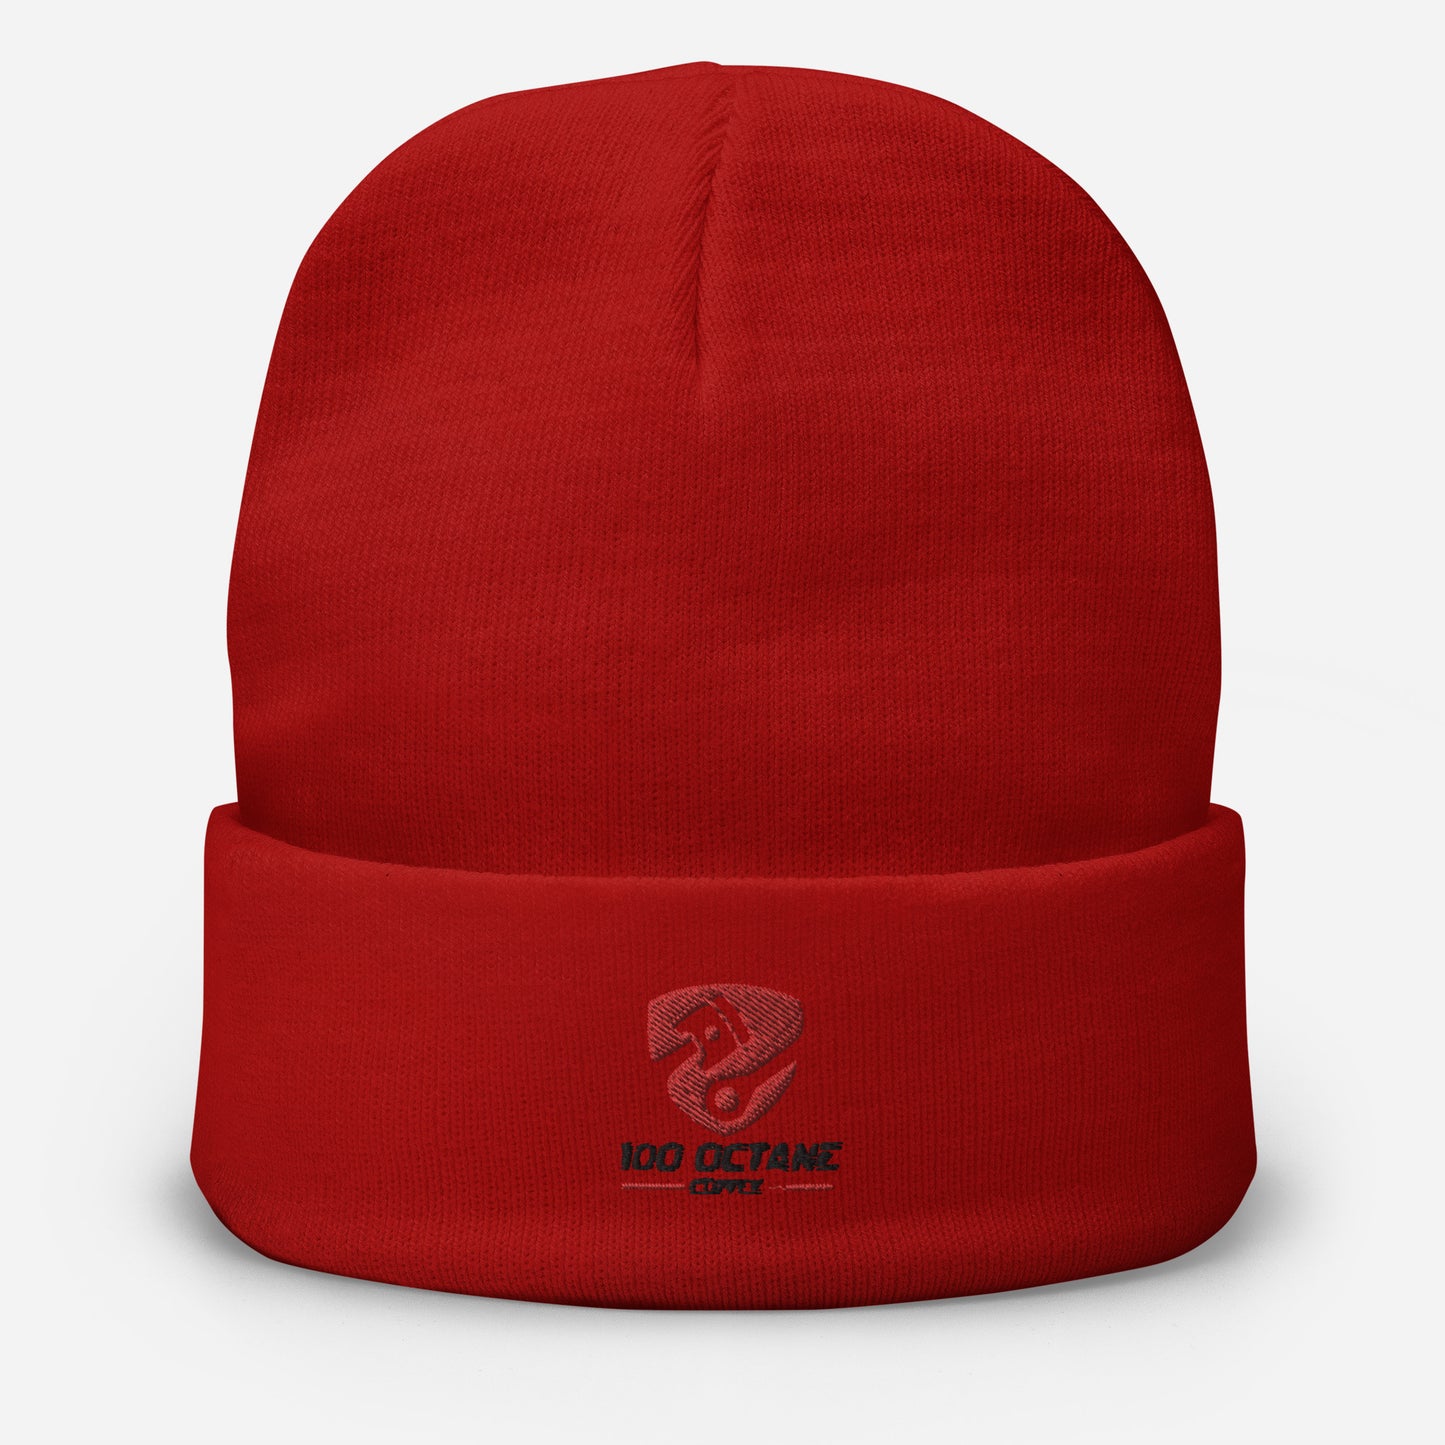 100 Octane Coffee Embroidered Beanie